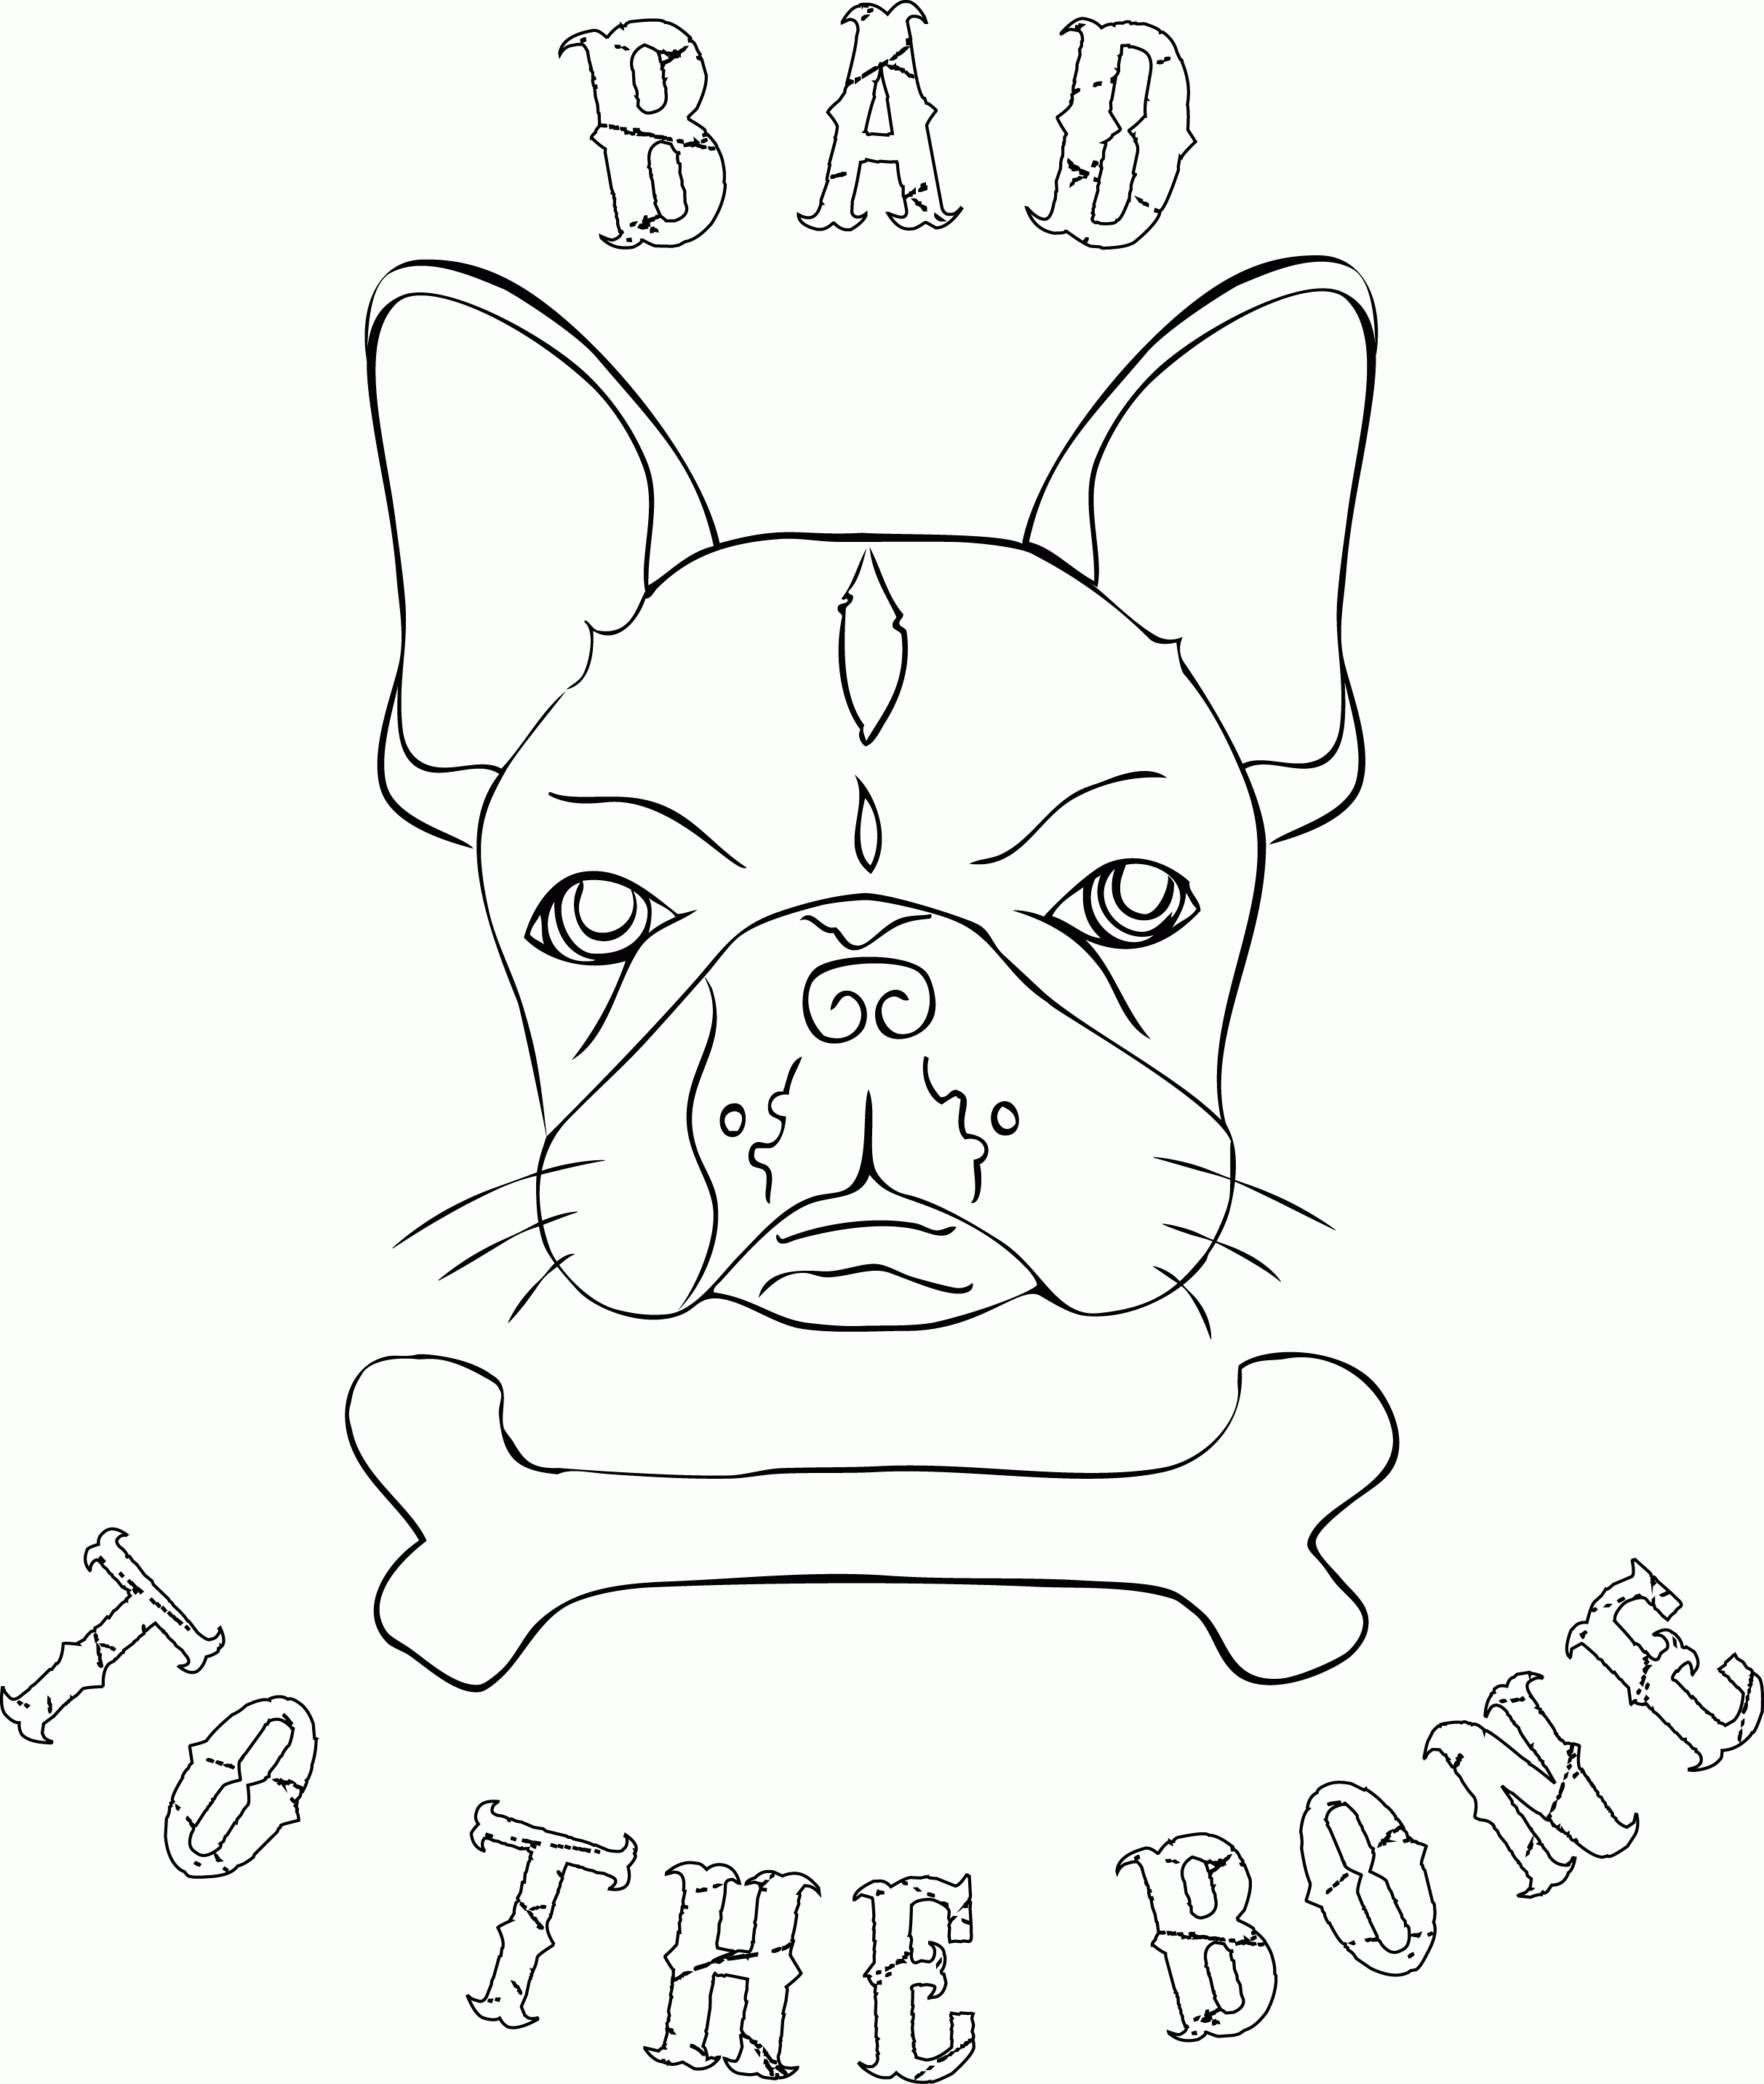 Coloring Pages In French - Coloring